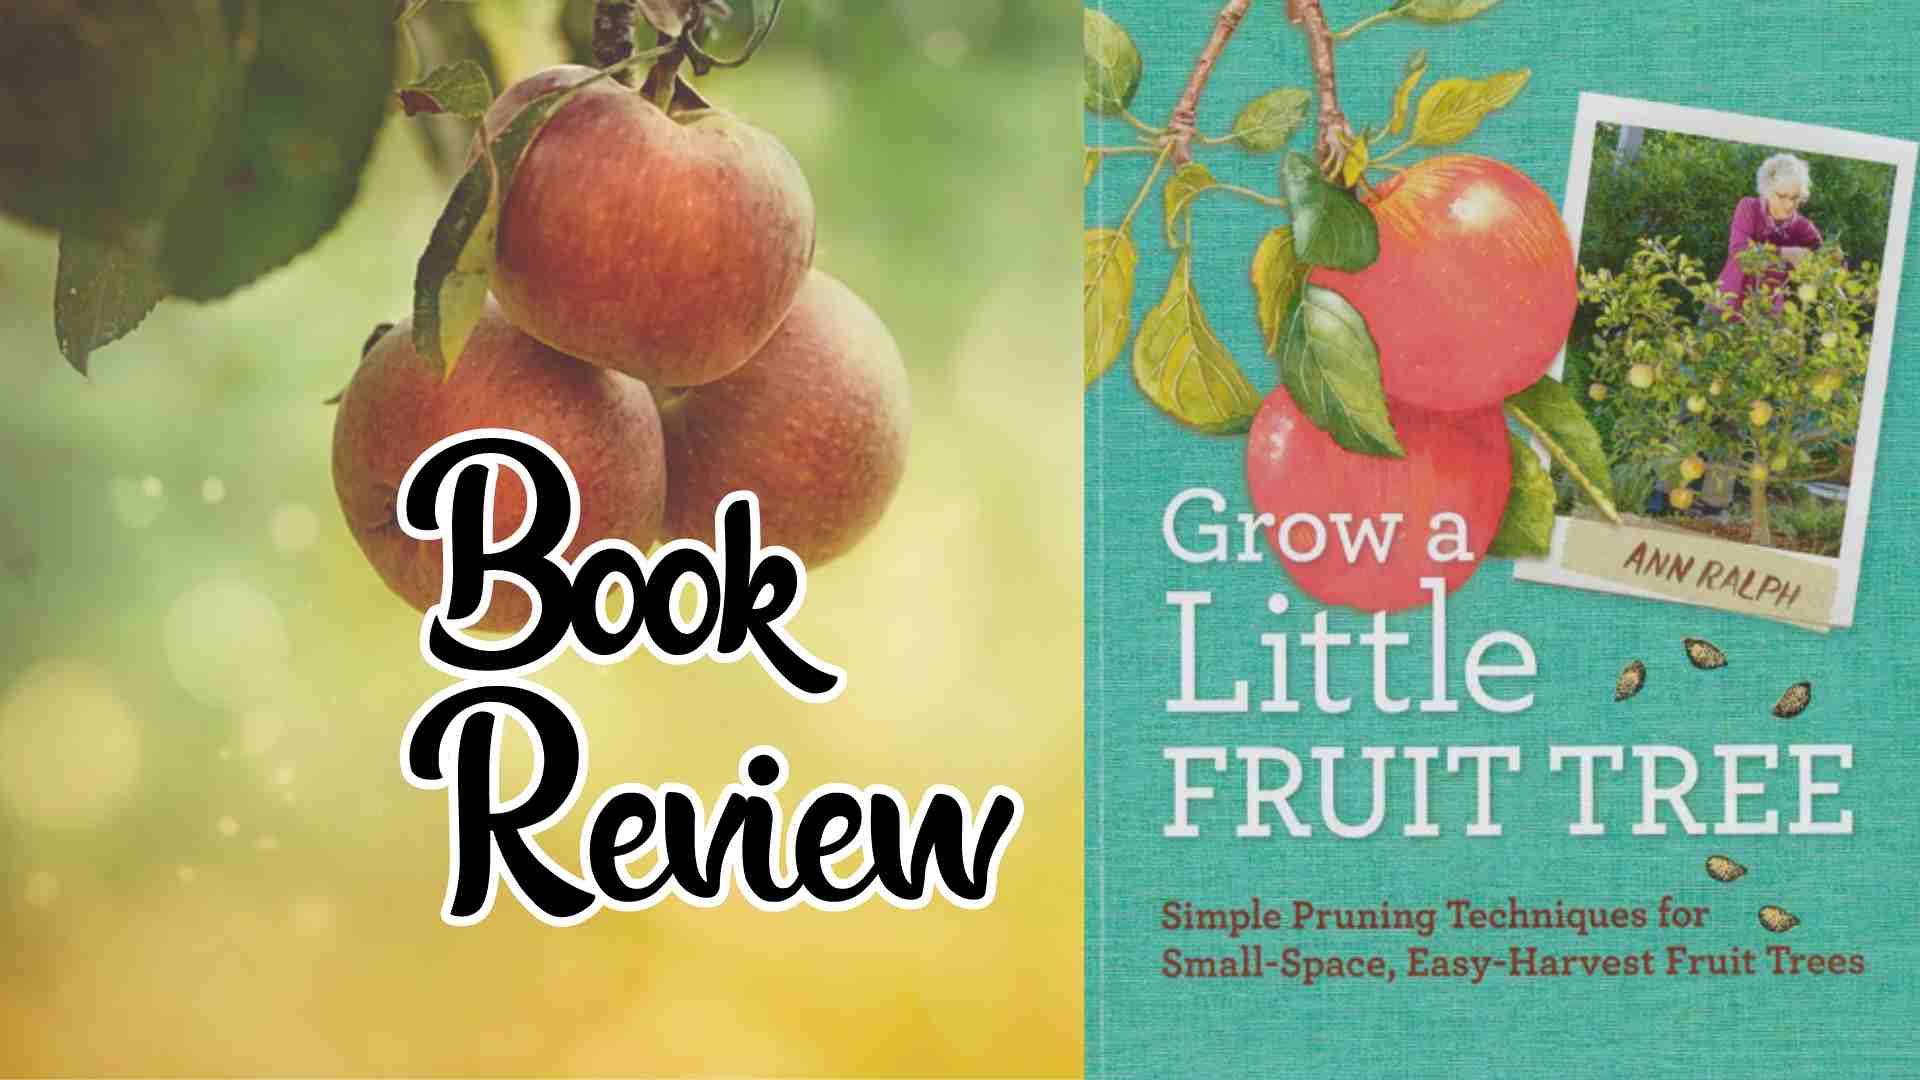 Grow a Little Fruit Tree book review with pruning tips. If you have a small garden and want to grow fruit trees, "Grow a Little Fruit Tree" is the perfect book for you. This comprehensive guide provides